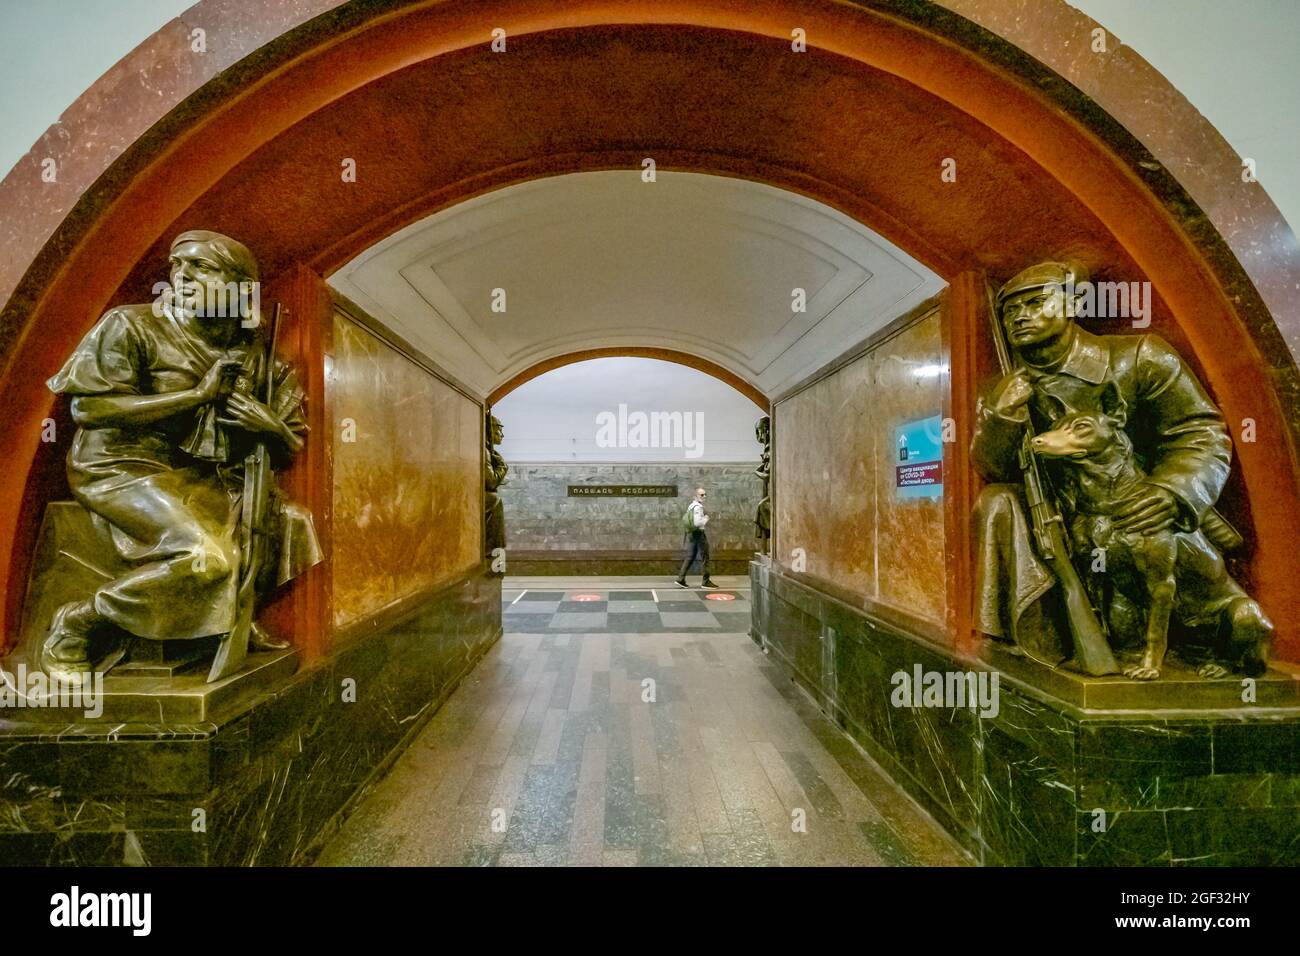 Male border guard with dog and female sharpshooter bronze sculptures flanking arch at Revolution Square subway station, Moscow, Russia Stock Photo